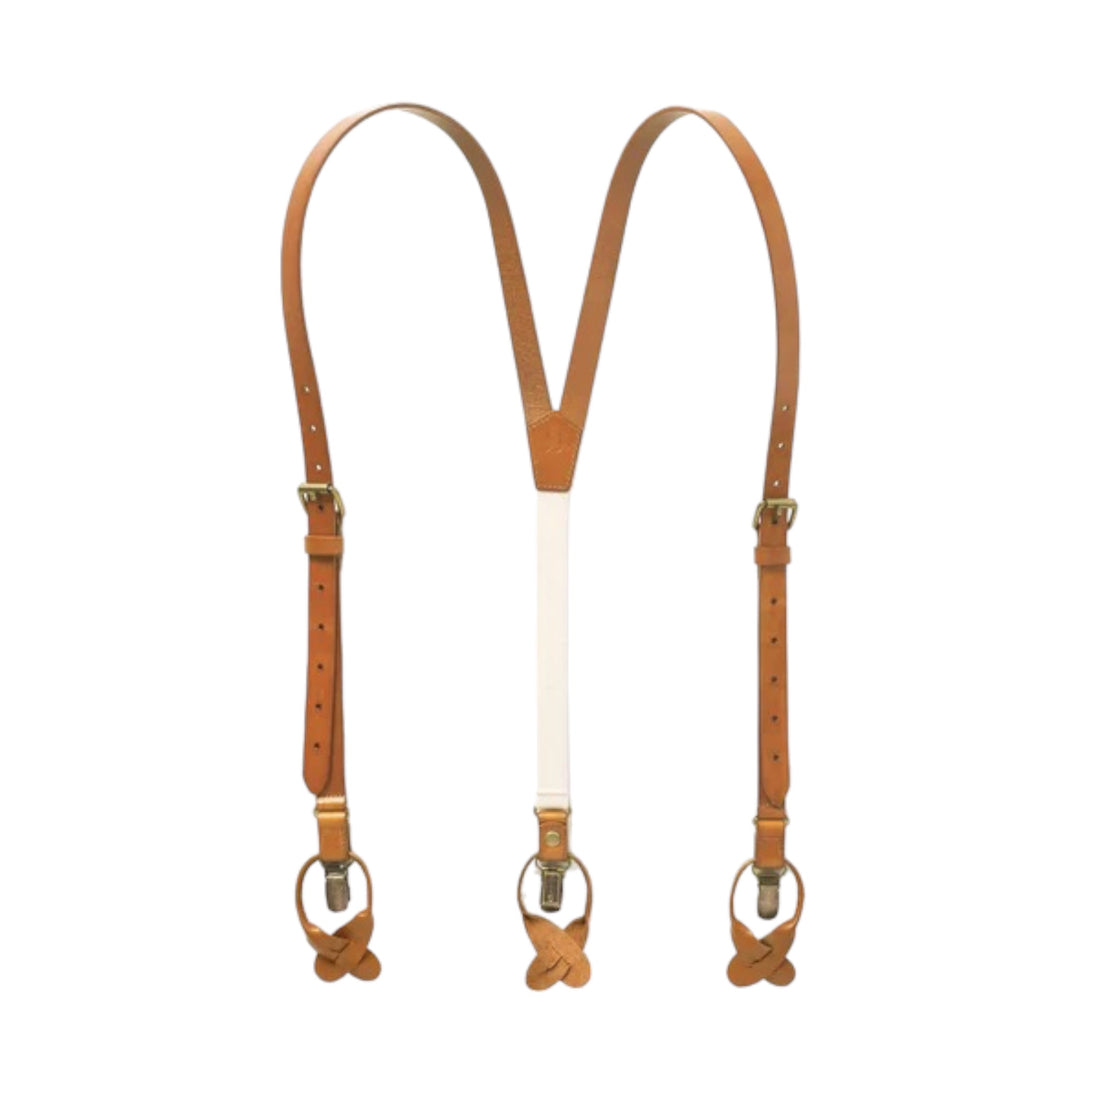 Mens Leather solid color adjustable suspenders